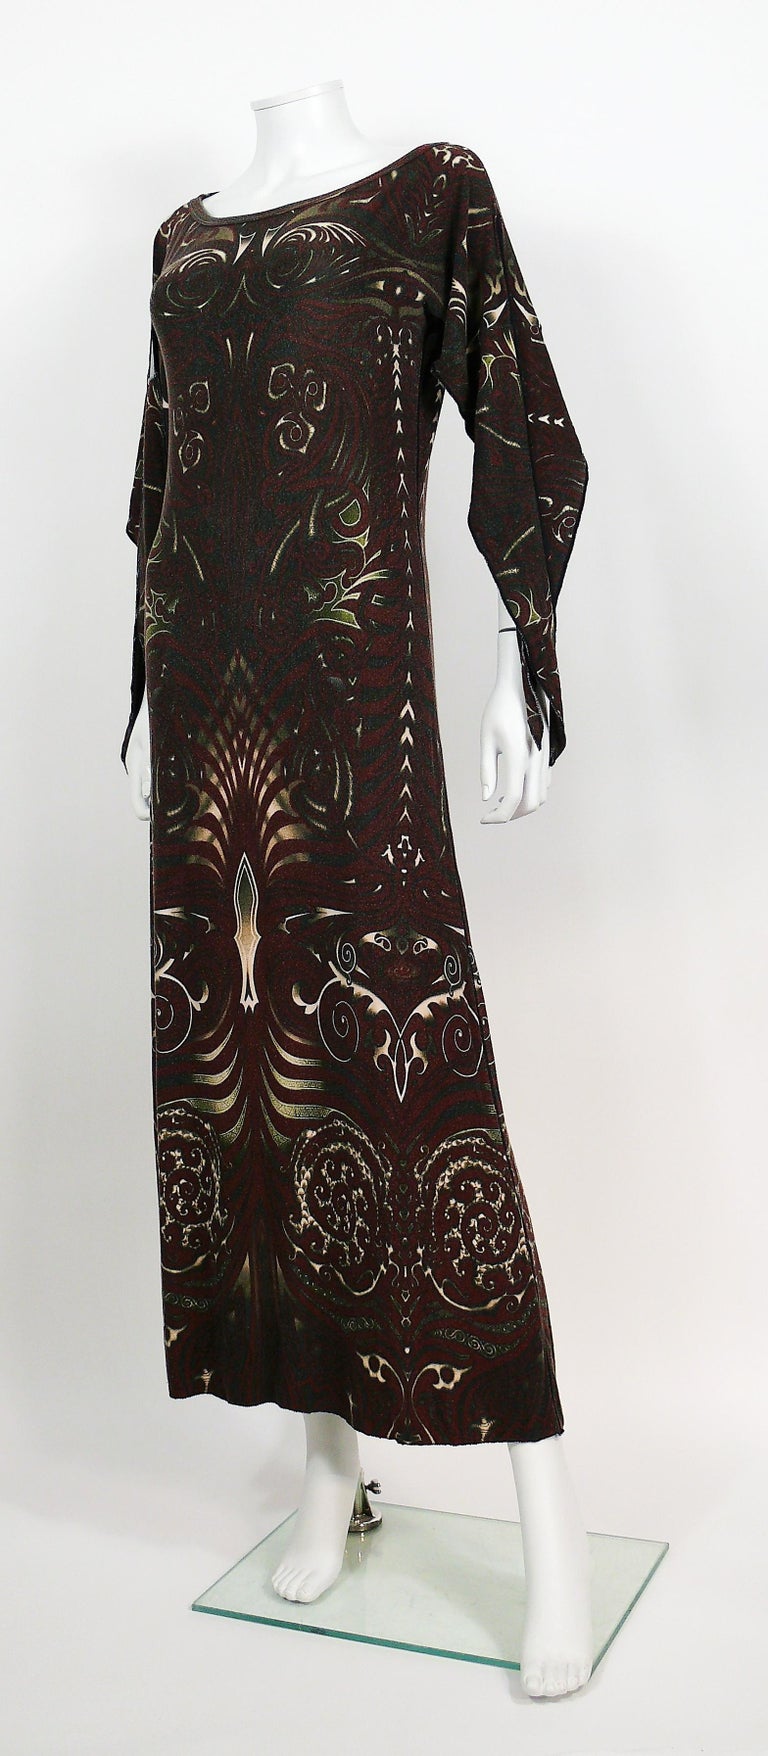 Jean Paul Gaultier Vintage Aboriginal Maori Tattoo Print Maxi Dress In Good Condition For Sale In Nice, FR